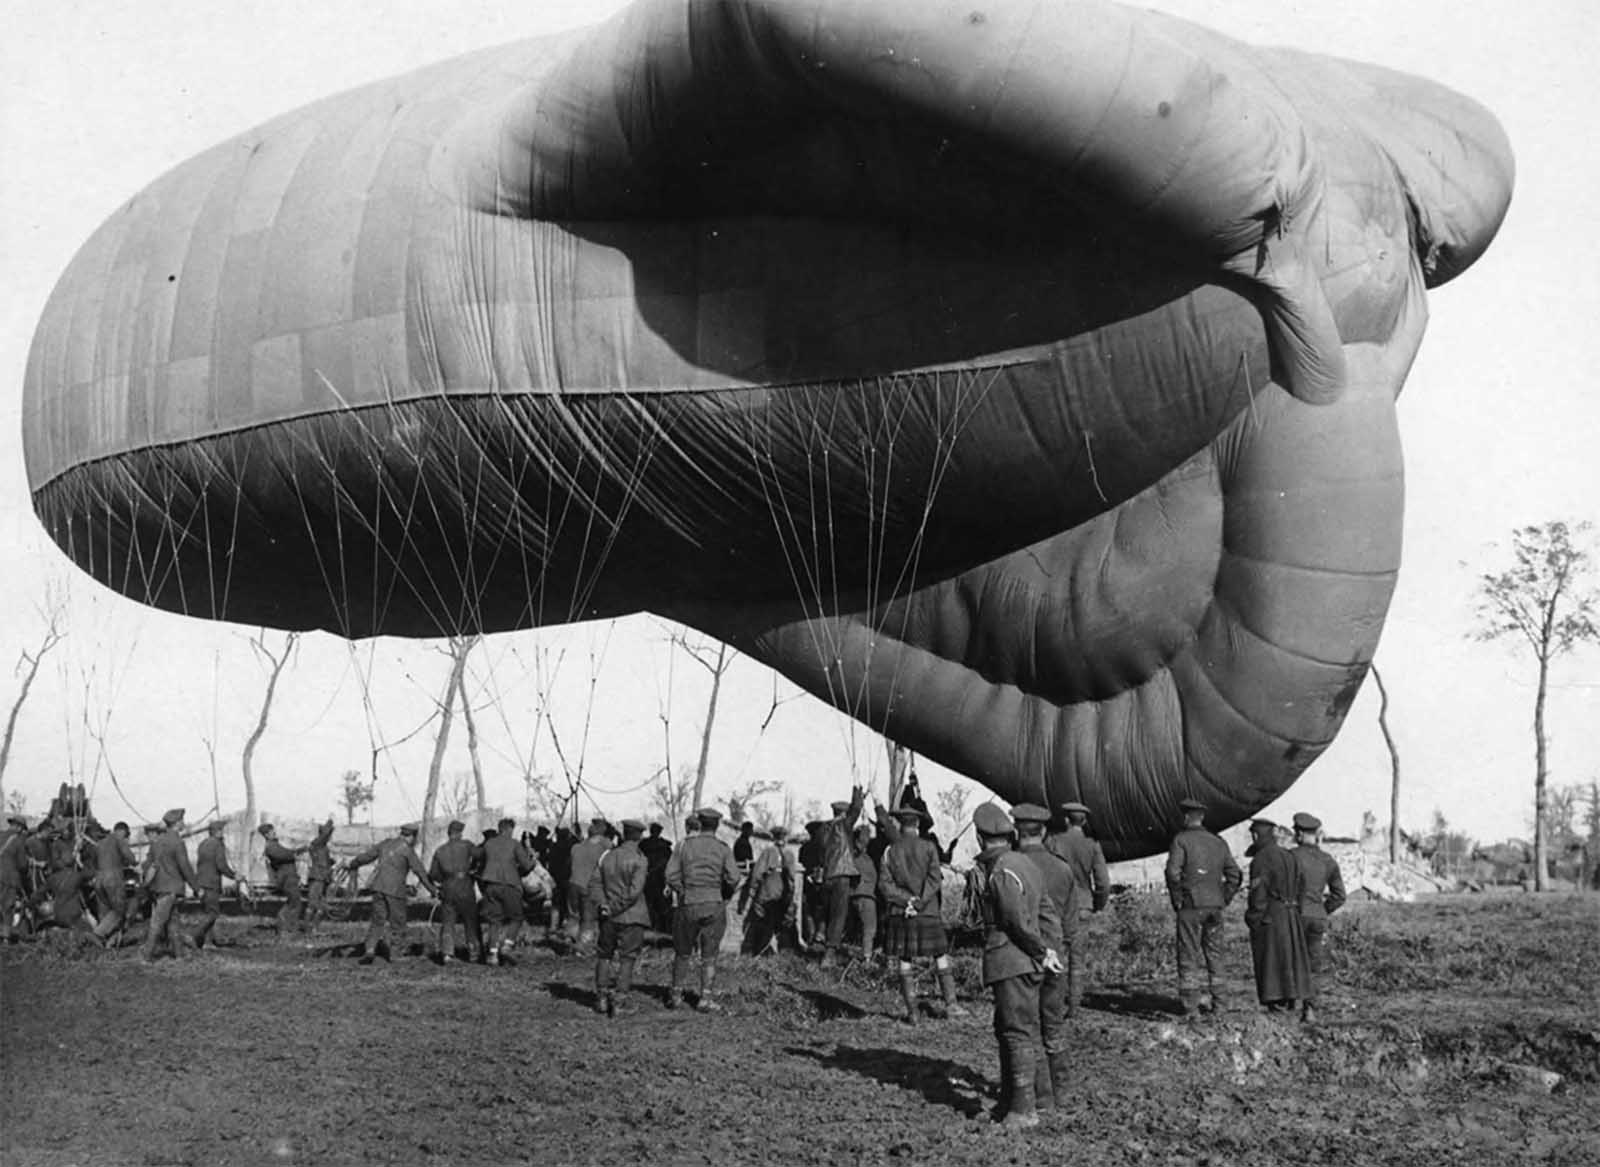 A returning observation balloon. A small army of men, dwarfed by the balloon, are controlling its descent with a multitude of ropes. The basket attached to the balloon, with space for two people, can be seen sitting on the ground. Frequently a target for gunfire, those conducting observations in these balloons were required to wear parachutes for a swift descent if necessary.